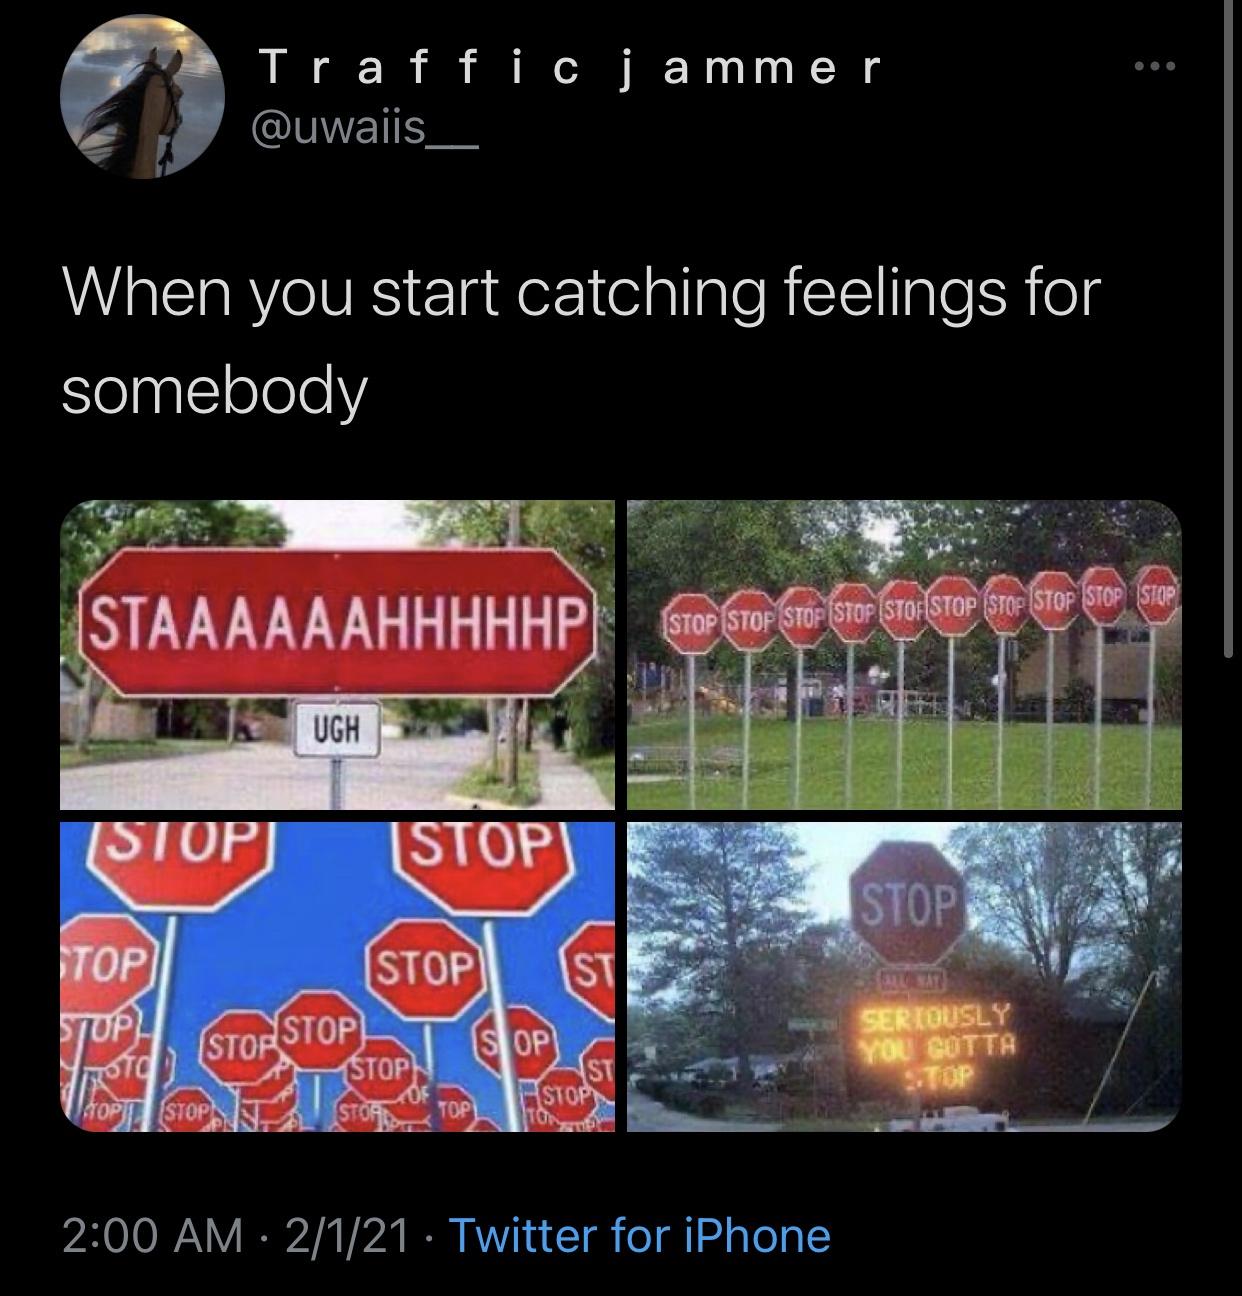 Traffic j ammer When you start catching feelings for somebody Staaaaaahhhhhp Stop Stop Stop Stop Stof Stop Stop Stop Stop Stop Ugh Stopi Istop Stop Top Stop Stop St Stor Stop Sop Stop St Stop Sat Seriously You Gotta mod Aopt Stop Top 2121 Twitter for…